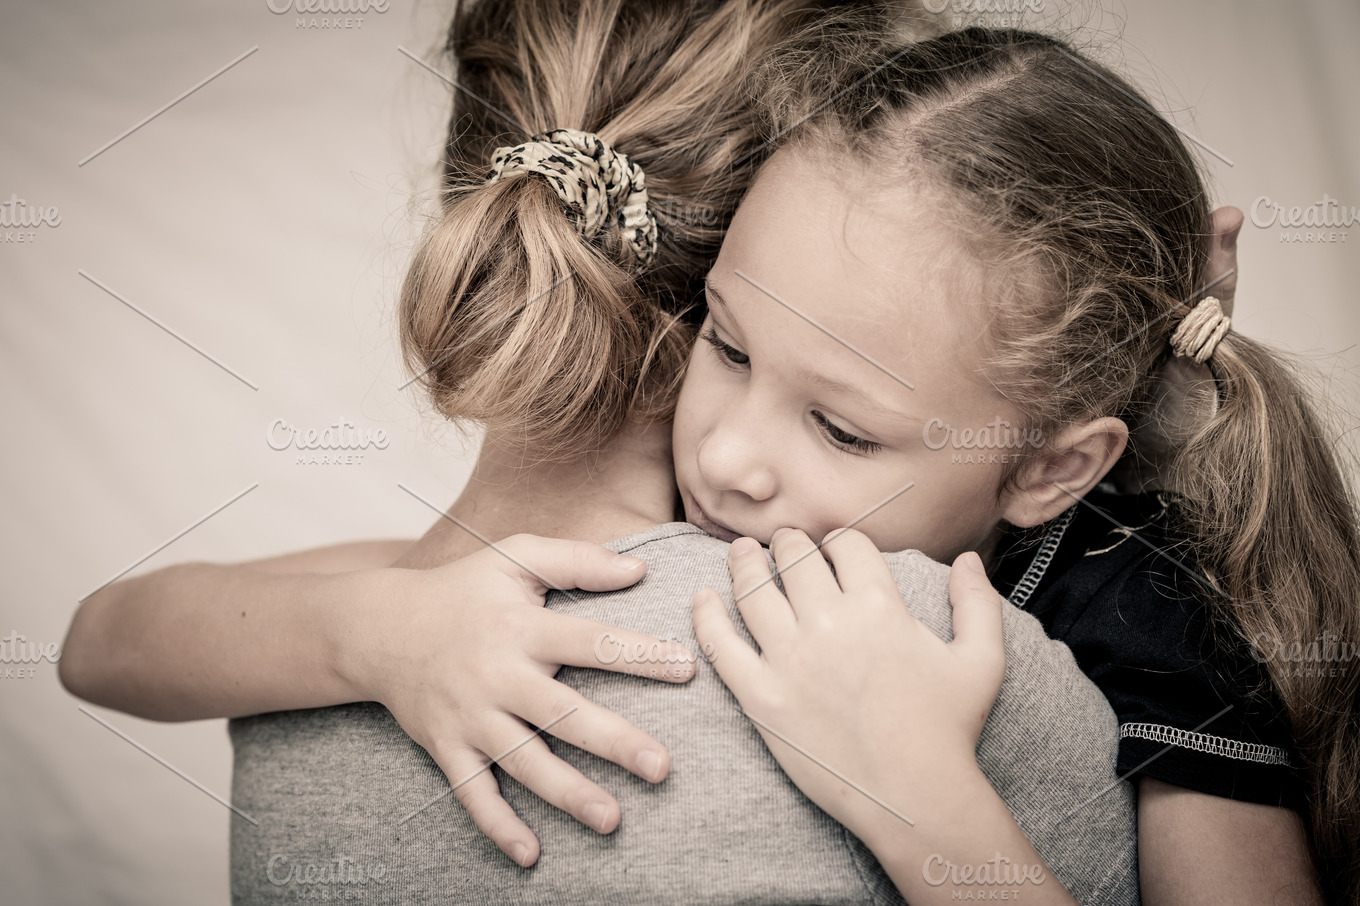 Sad Daughter High Quality People Images ~ Creative Market